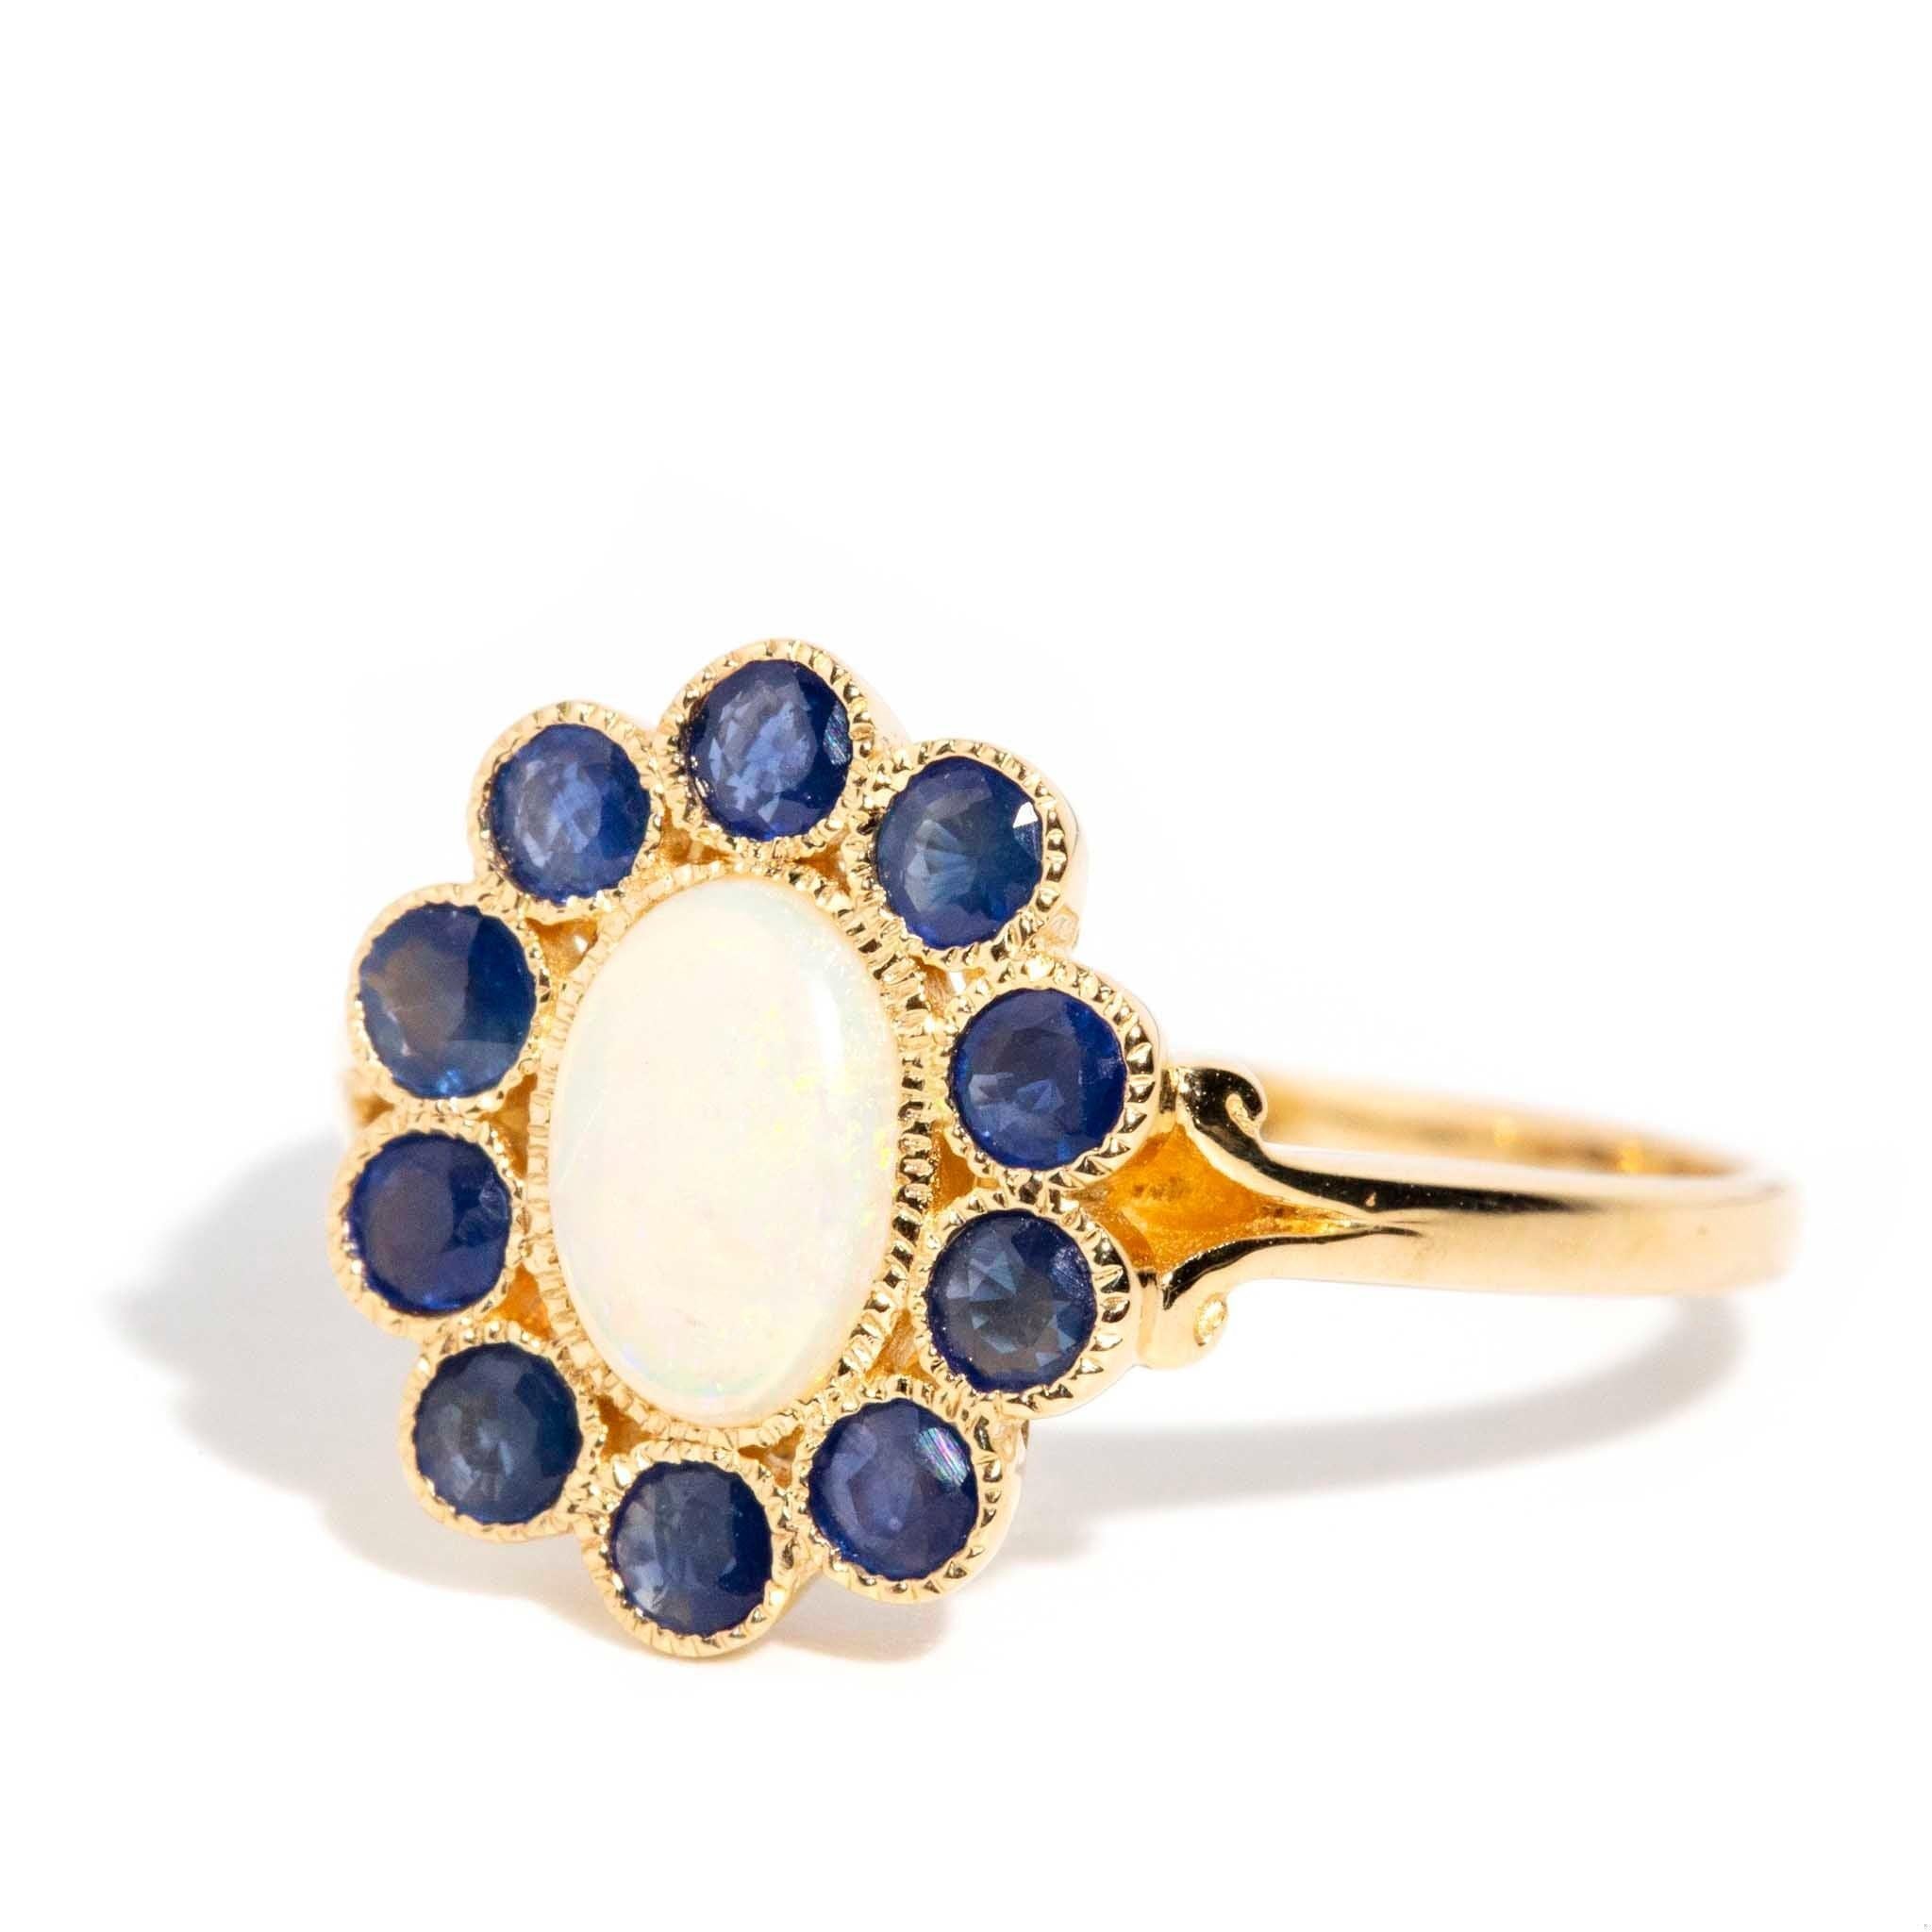 Contemporary Australian Opal & Sapphire Ring 9 Carat Yellow Gold In New Condition For Sale In Hamilton, AU